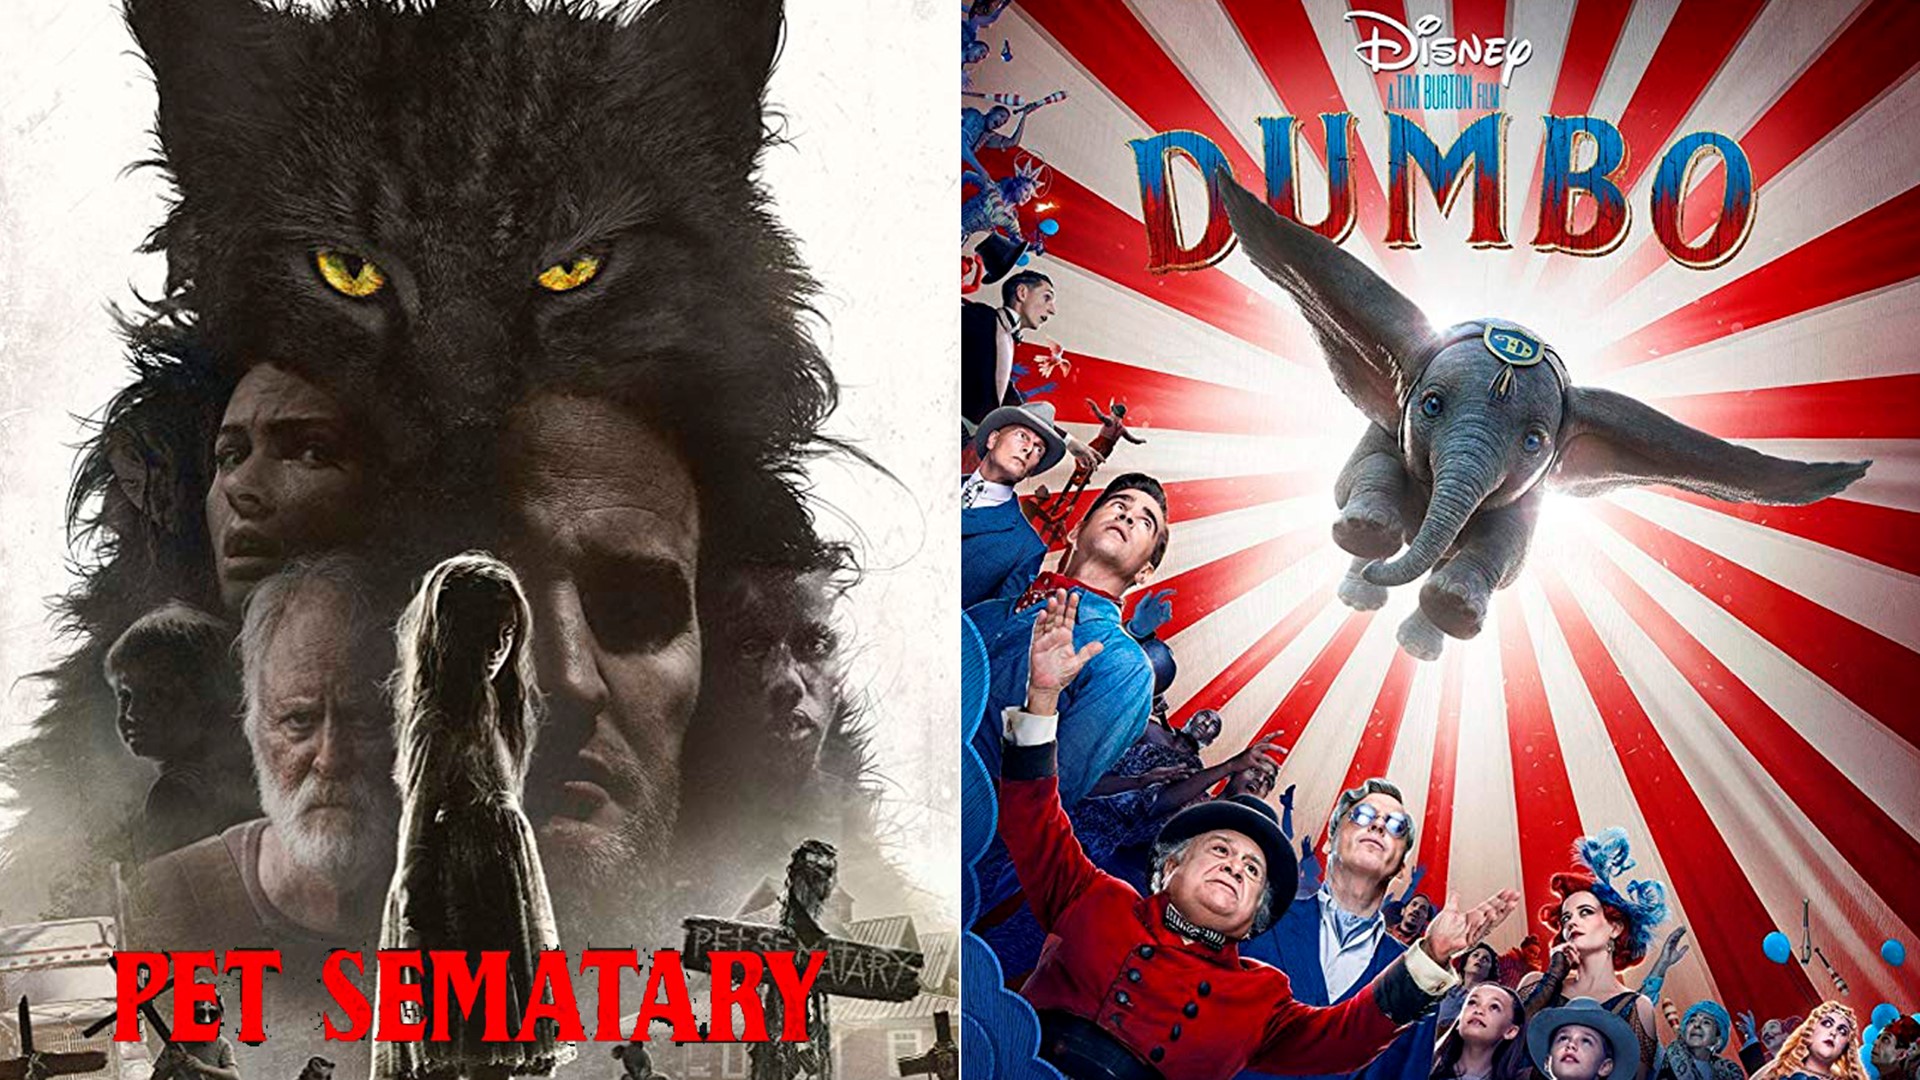 Extra Butter reviews 'Pet Sematary' and 'Dumbo.' Also hear from stars Danny DeVito of 'Dumbo' and Jeté Laurence from 'Pet Sematary.' Interviews provided by Walt Disney Studios Motion Pictures and Paramount Pictures.